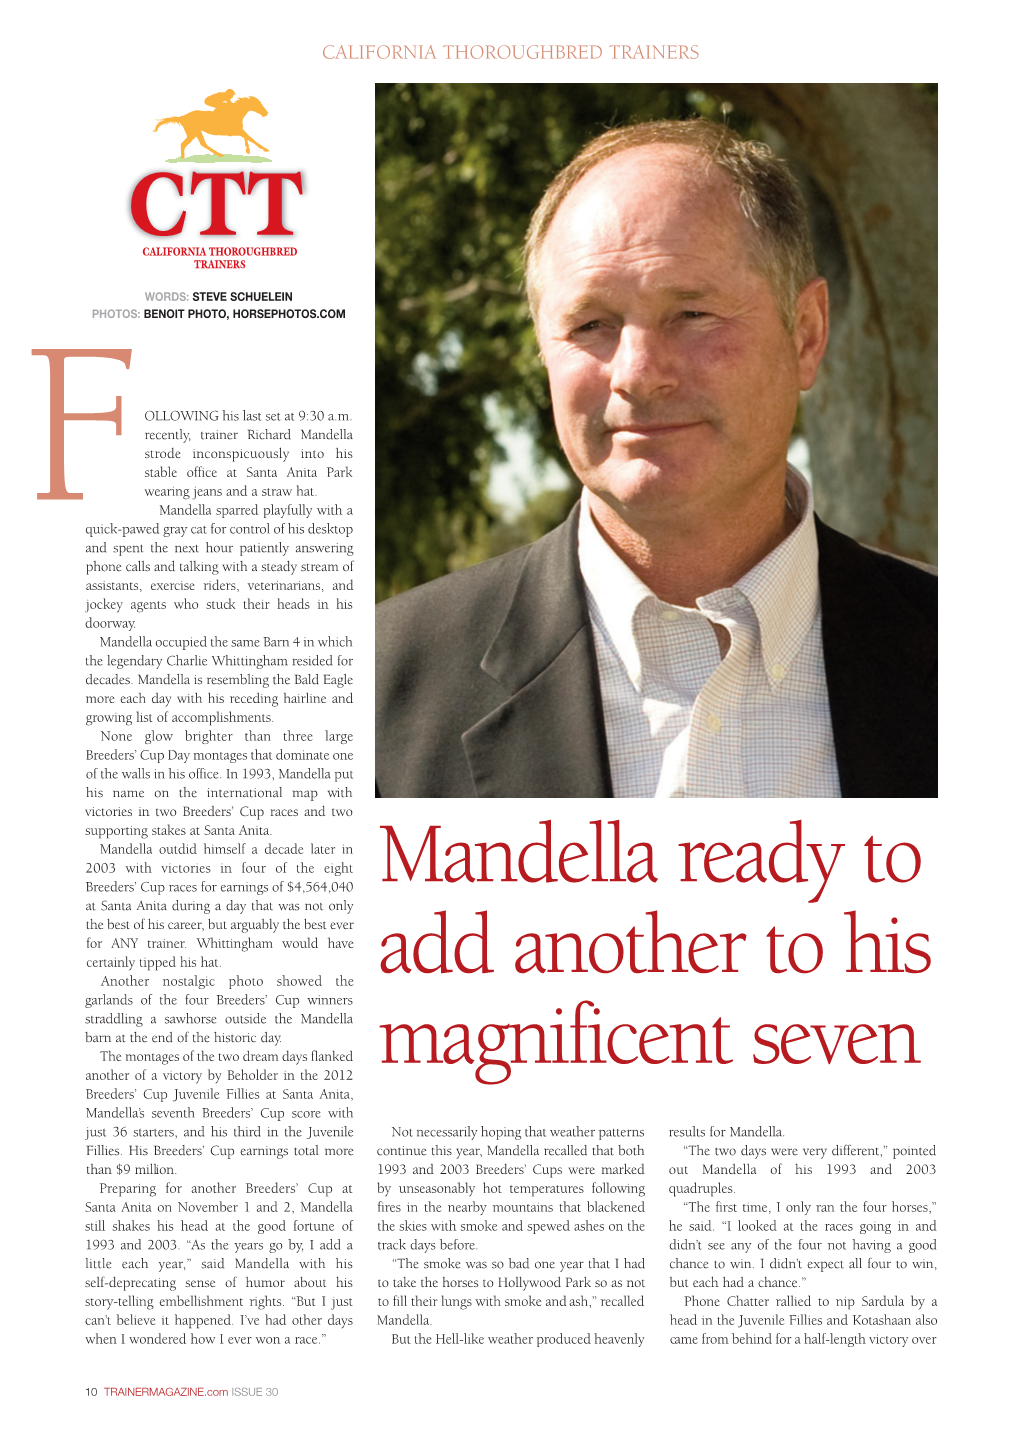 Mandella Ready to Add Another to His Magnificent Seven